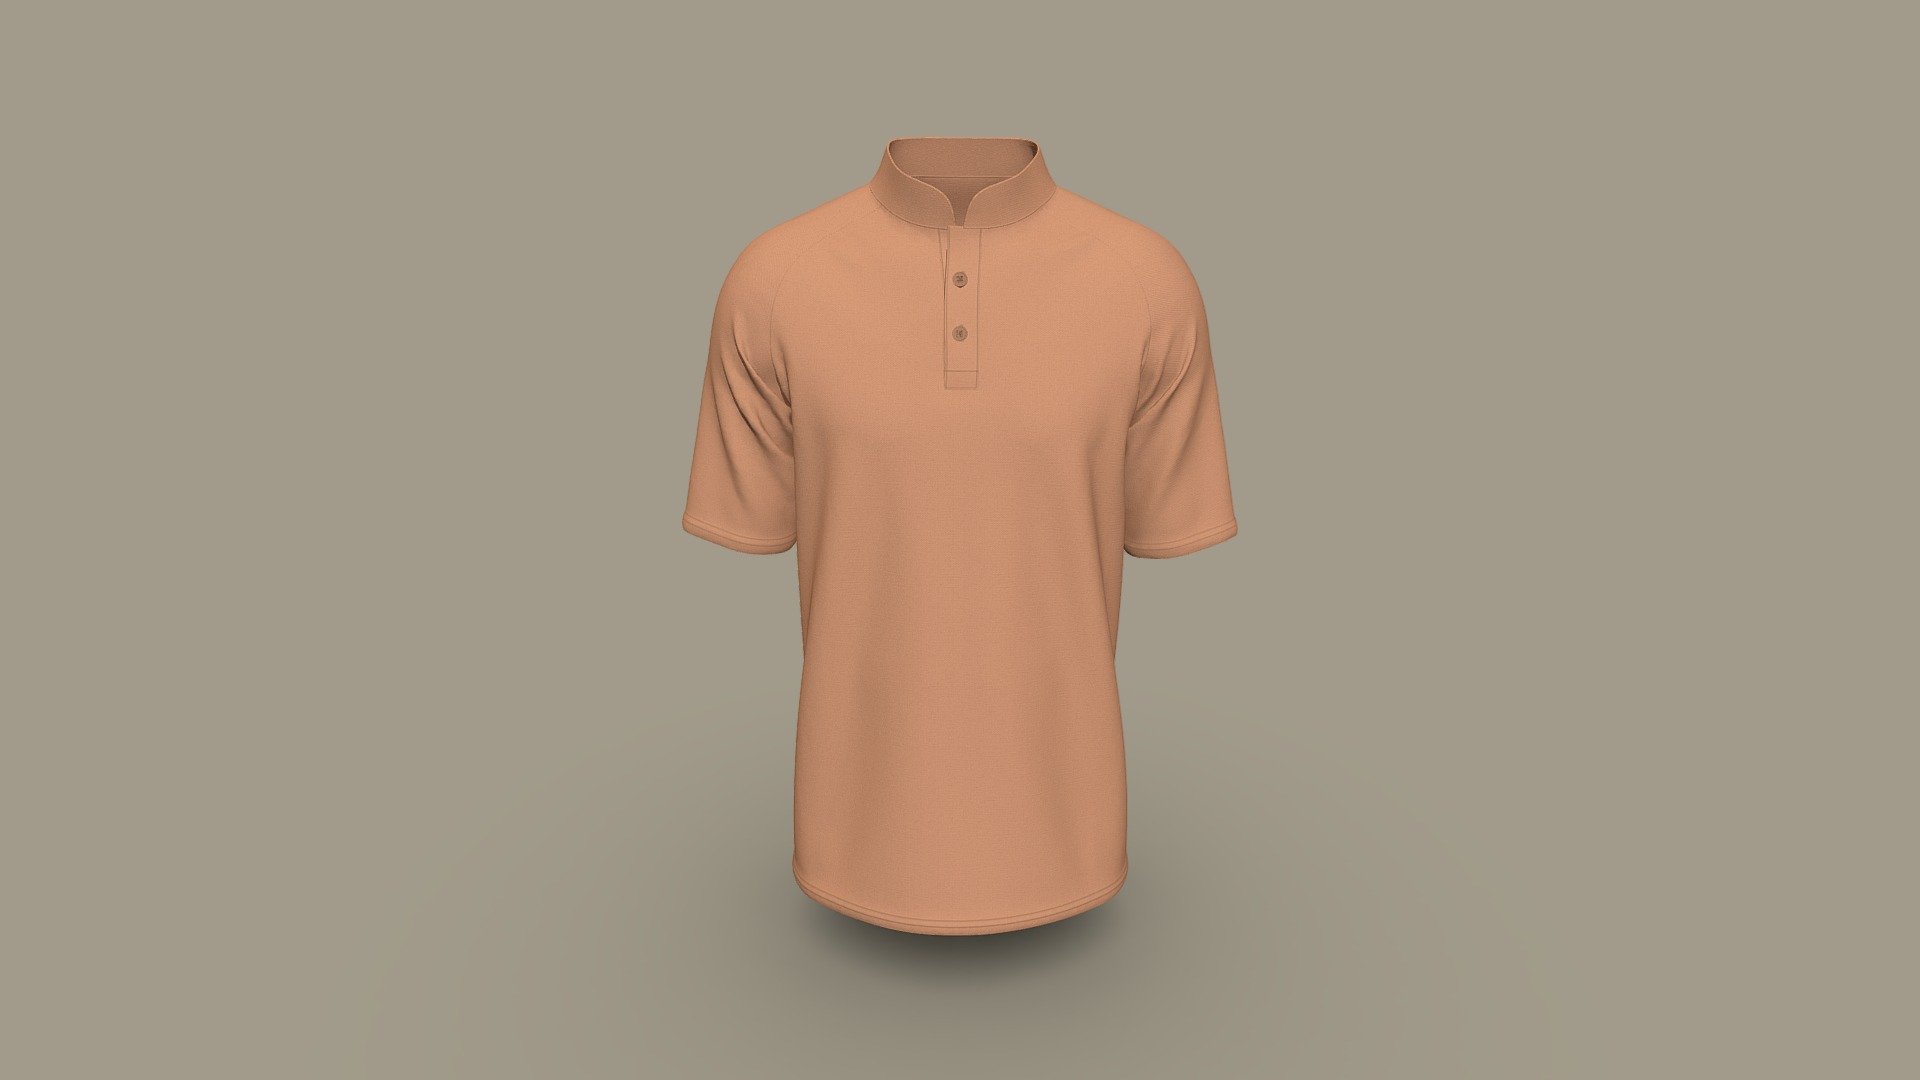 Cloth Title = Classic Raglan Sleeve Mens Knit Fashion Polo 

SKU = DG100203 

Category = Men 

Product Type = Polo 

Cloth Length = Regular 

Body Fit = Regular Fit 

Occasion = Casual 

Sleeve Style = Raglan Sleeve 


Our Services:

3D Apparel Design.

OBJ,FBX,GLTF Making with High/Low Poly.

Fabric Digitalization.

Mockup making.

3D Teck Pack.

Pattern Making.

2D Illustration.

Cloth Animation and 360 Spin Video.


Contact us:- 

Email: info@digitalfashionwear.com 

Website: https://digitalfashionwear.com 


We designed all the types of cloth specially focused on product visualization, e-commerce, fitting, and production. 

We will design: 

T-shirts 

Polo shirts 

Hoodies 

Sweatshirt 

Jackets 

Shirts 

TankTops 

Trousers 

Bras 

Underwear 

Blazer 

Aprons 

Leggings 

and All Fashion items. 





Our goal is to make sure what we provide you, meets your demand 3d model